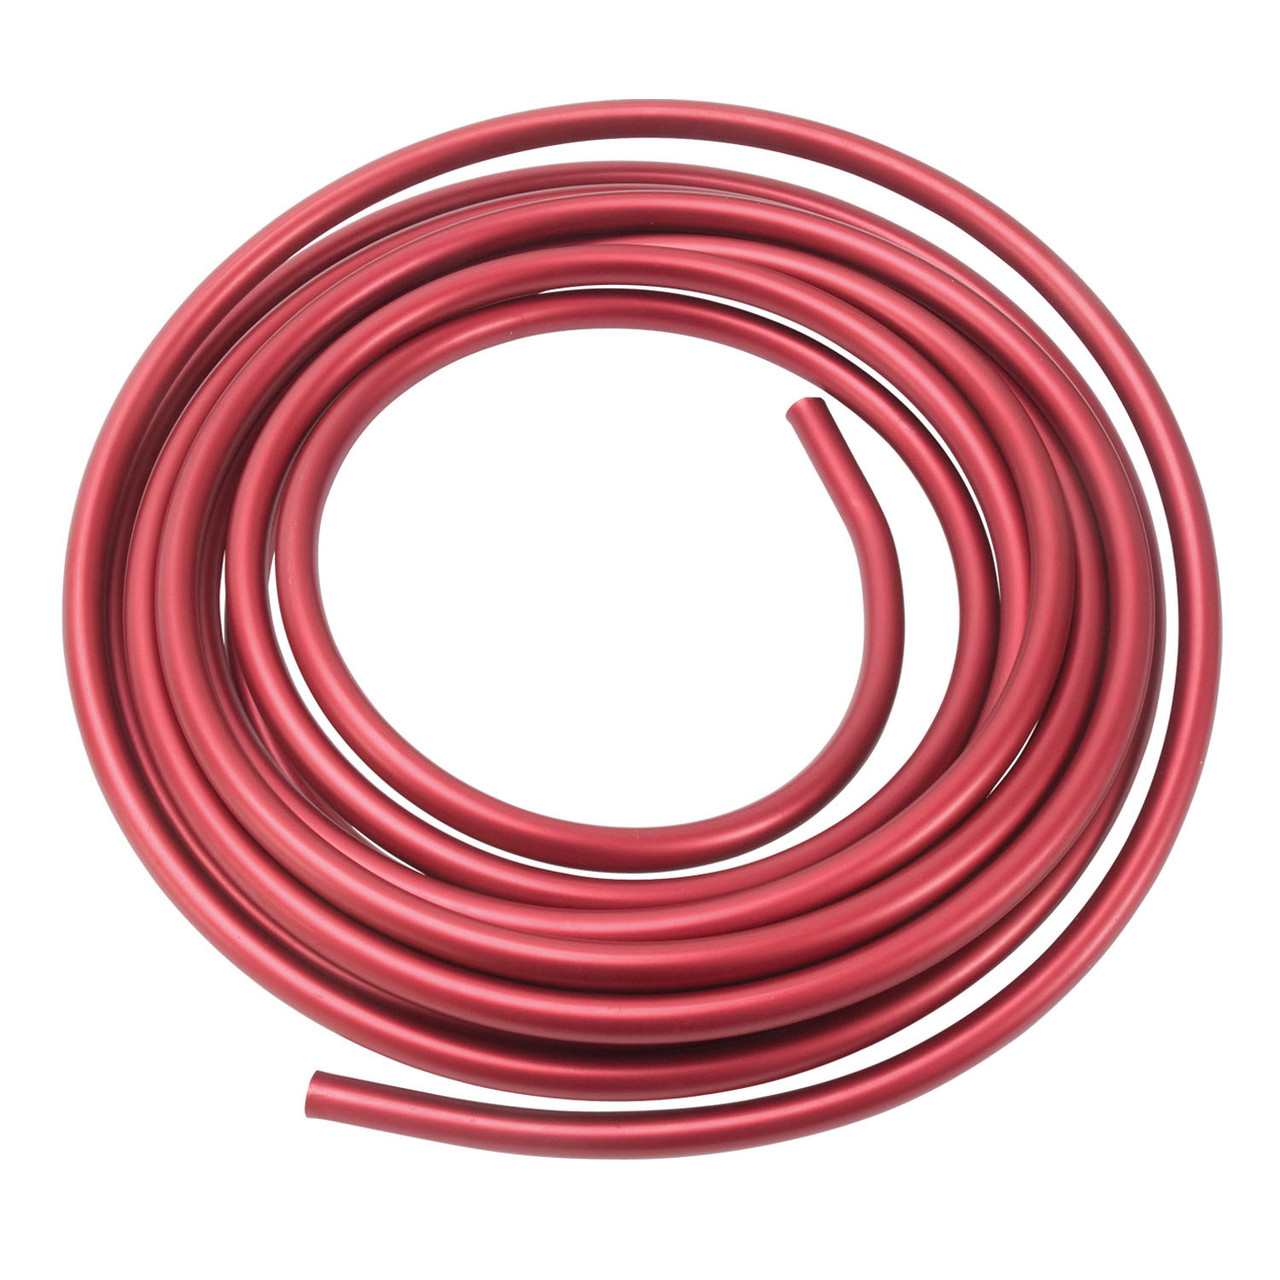 Russell 3/8 Tube Aluminum Fuel Line 25 Ft. - Red